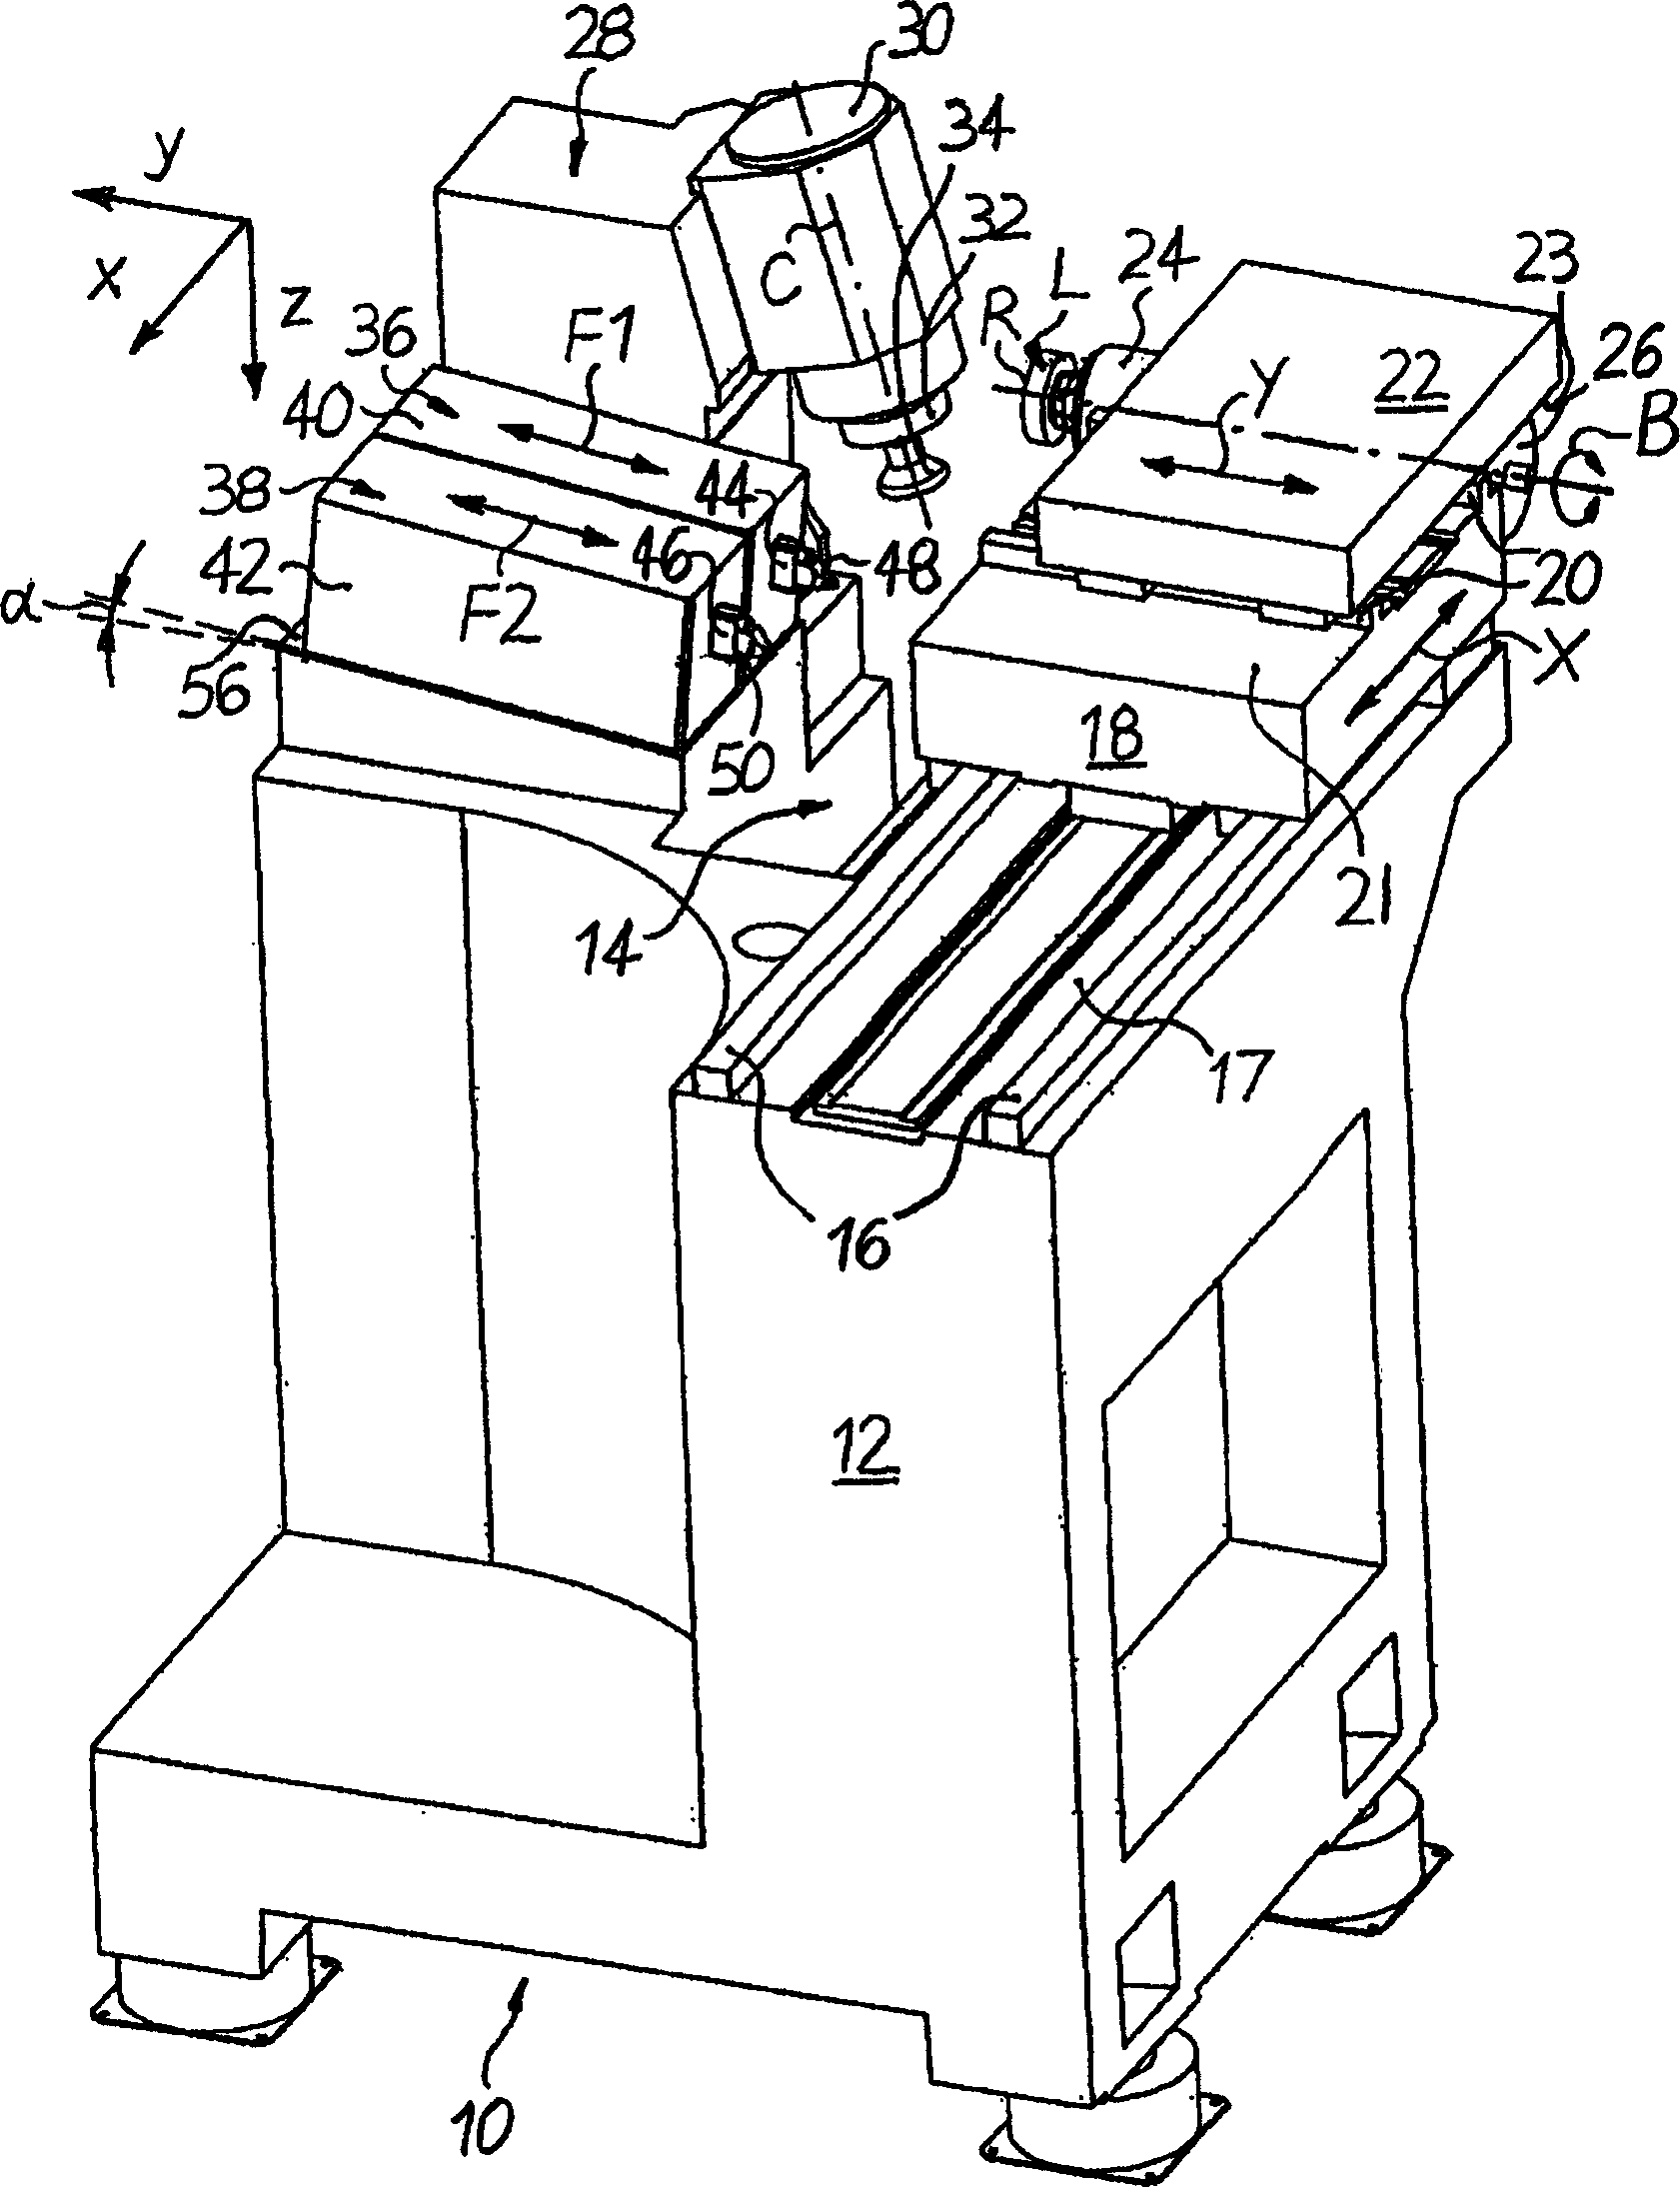 Machine for grinding optical workpieces, in particular plastic eyeglass lenses